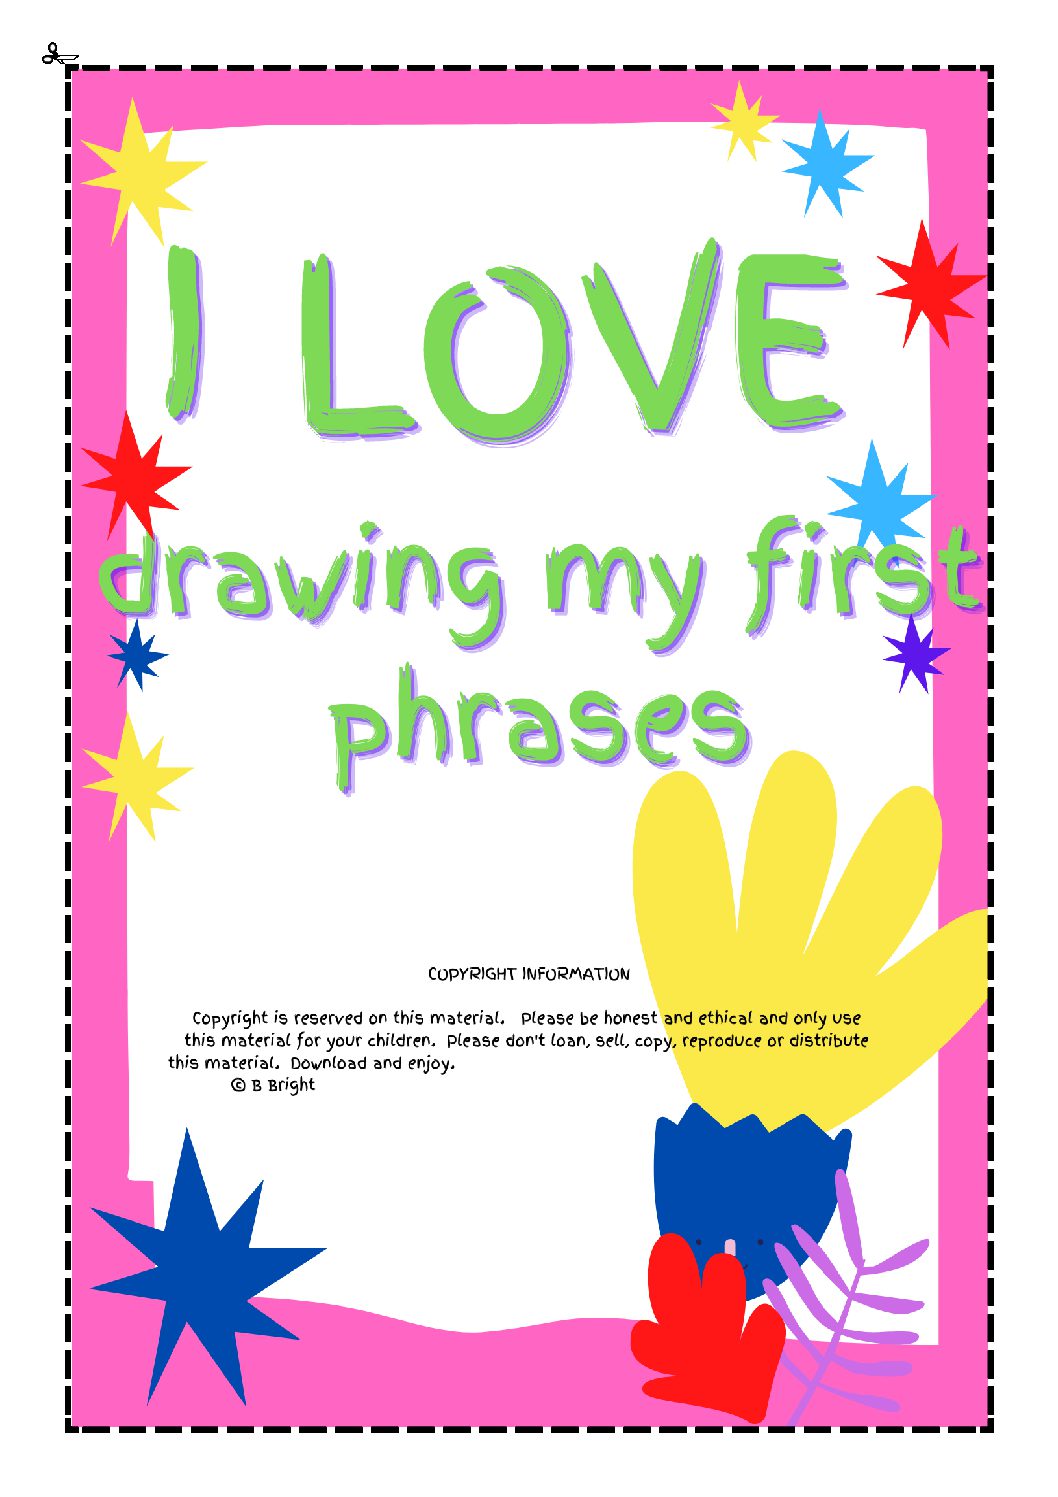 Drawing first phrases - Cover page